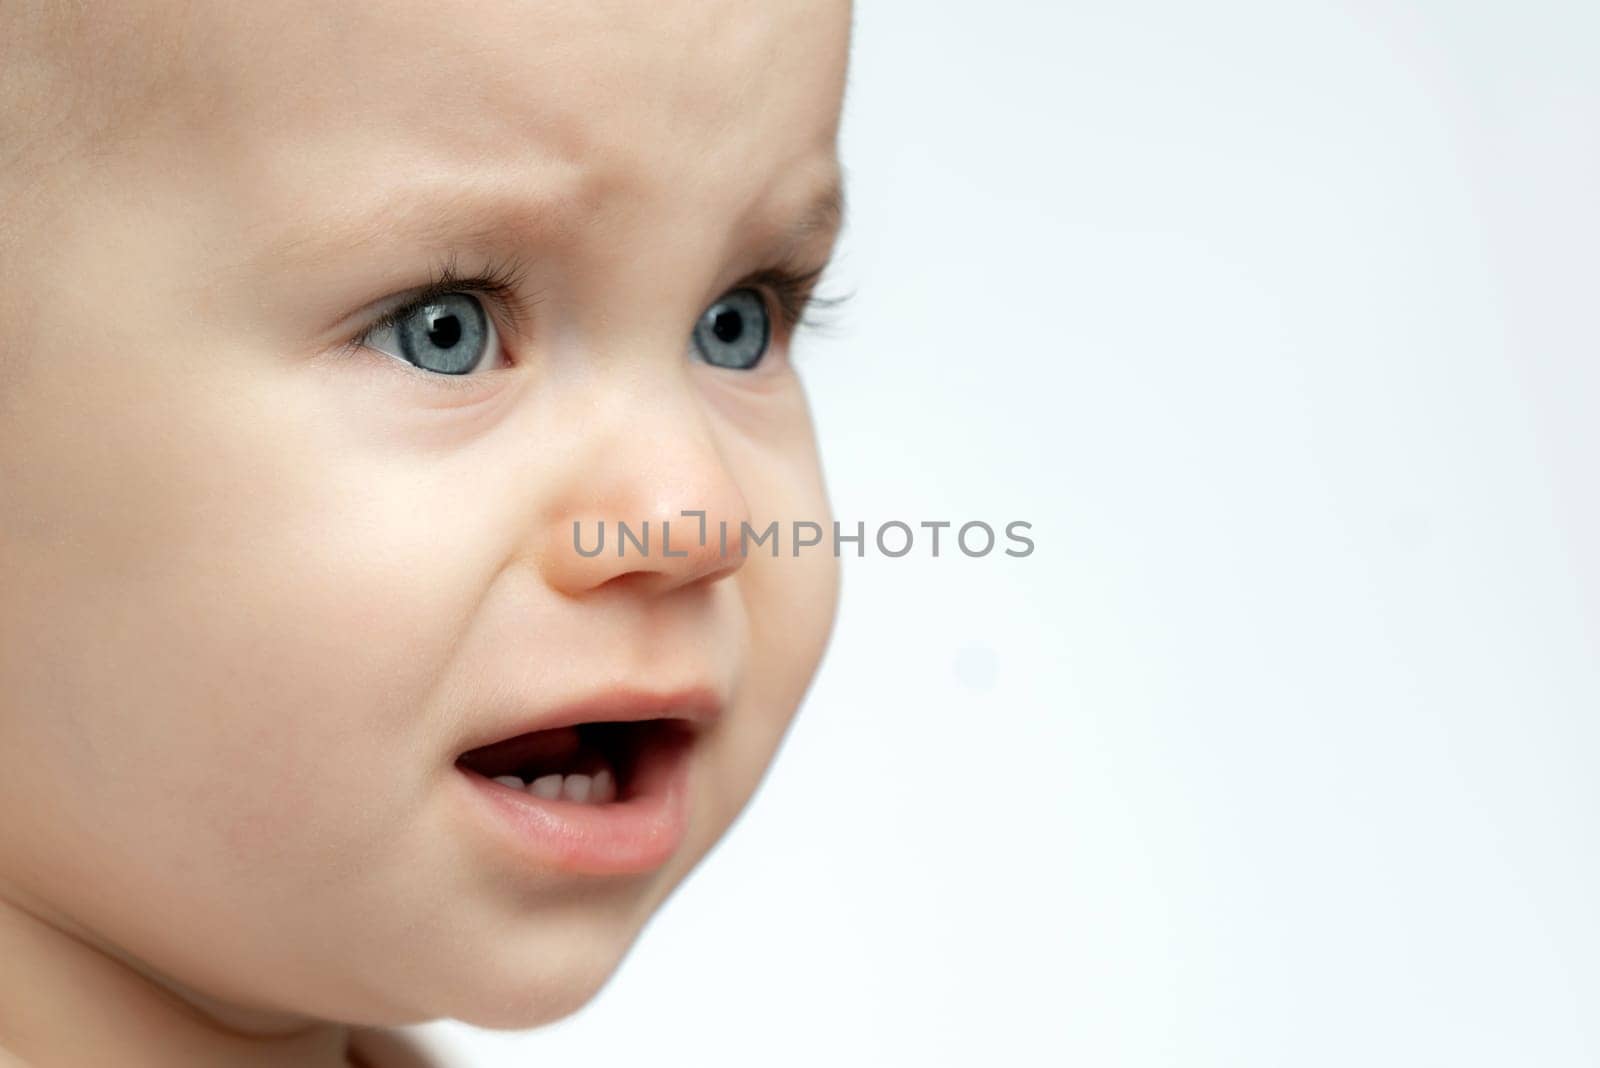 A baby with blue eyes is making a sad face with his mouth open by Mariakray